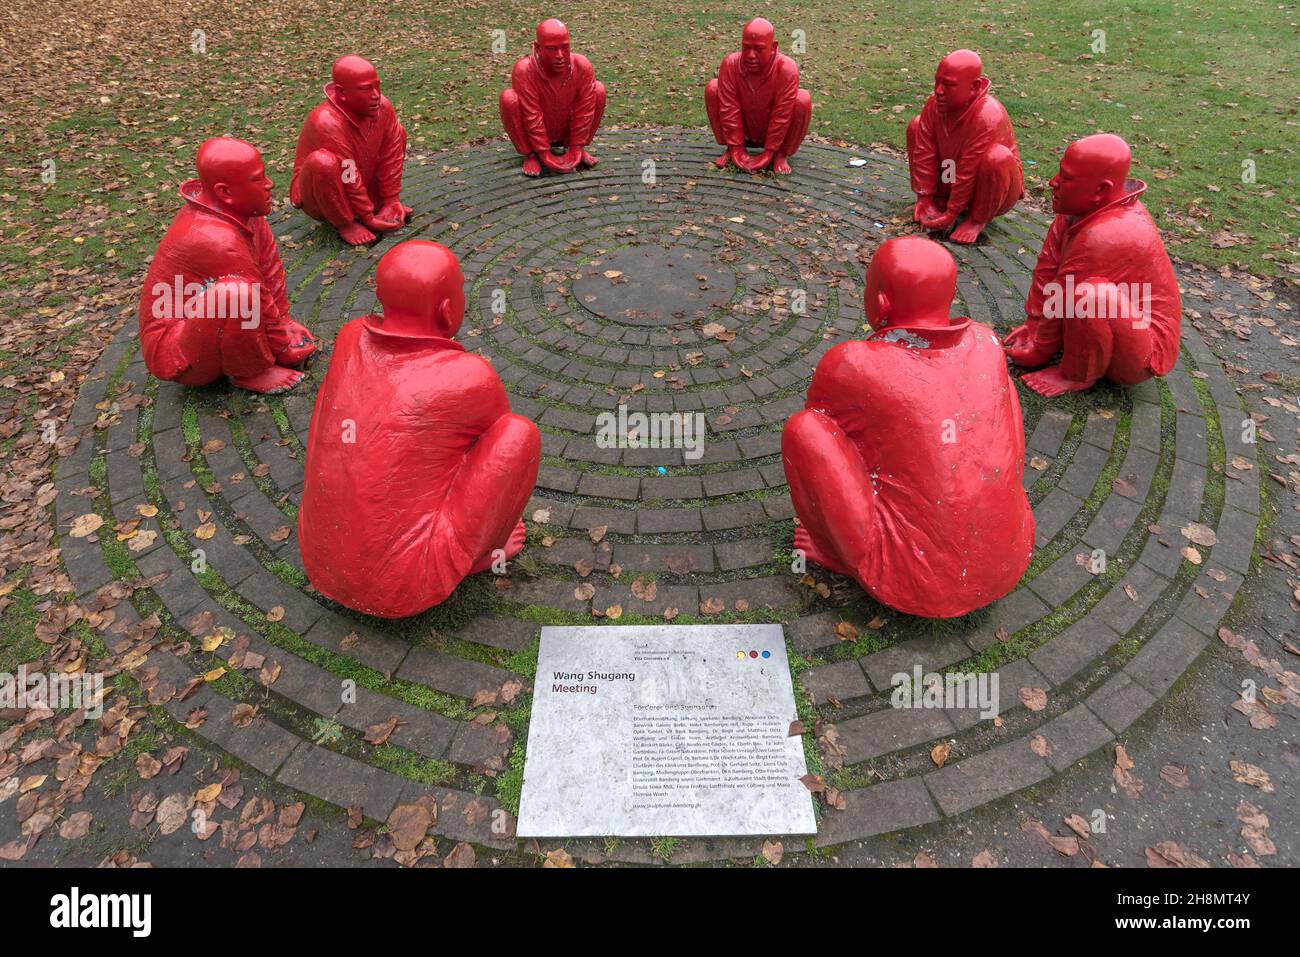 Meeting, a sculpture group by the Chinese artist Wang Shugang, Bamberg, Upper Franconia, Bavaria, Germany Stock Photo